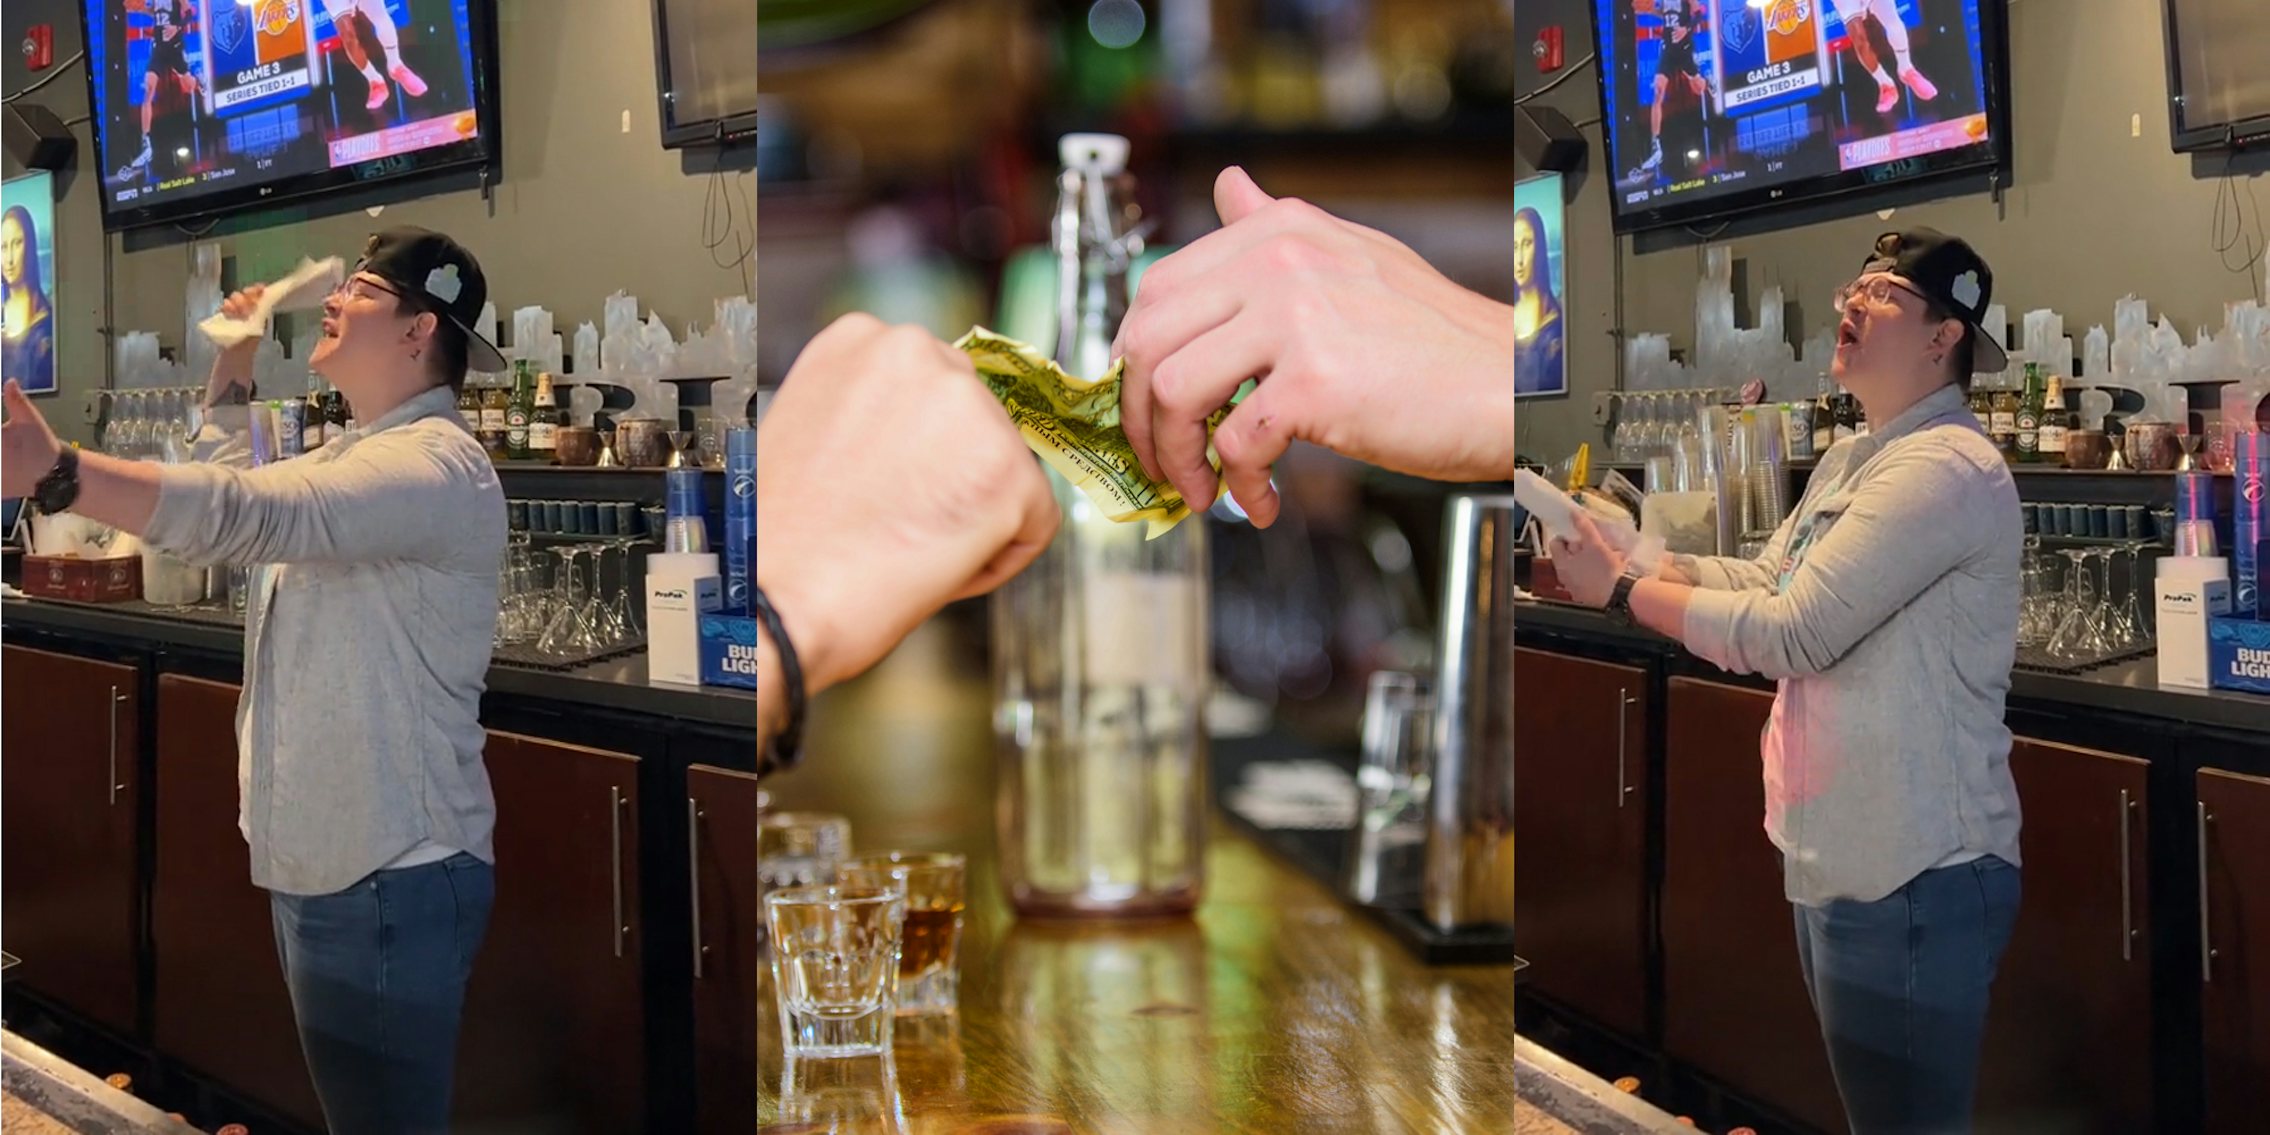 bartender speaking behind bar with hands out (l) customer tipping bartender (c) bartender speaking behind bar with hands out (r)